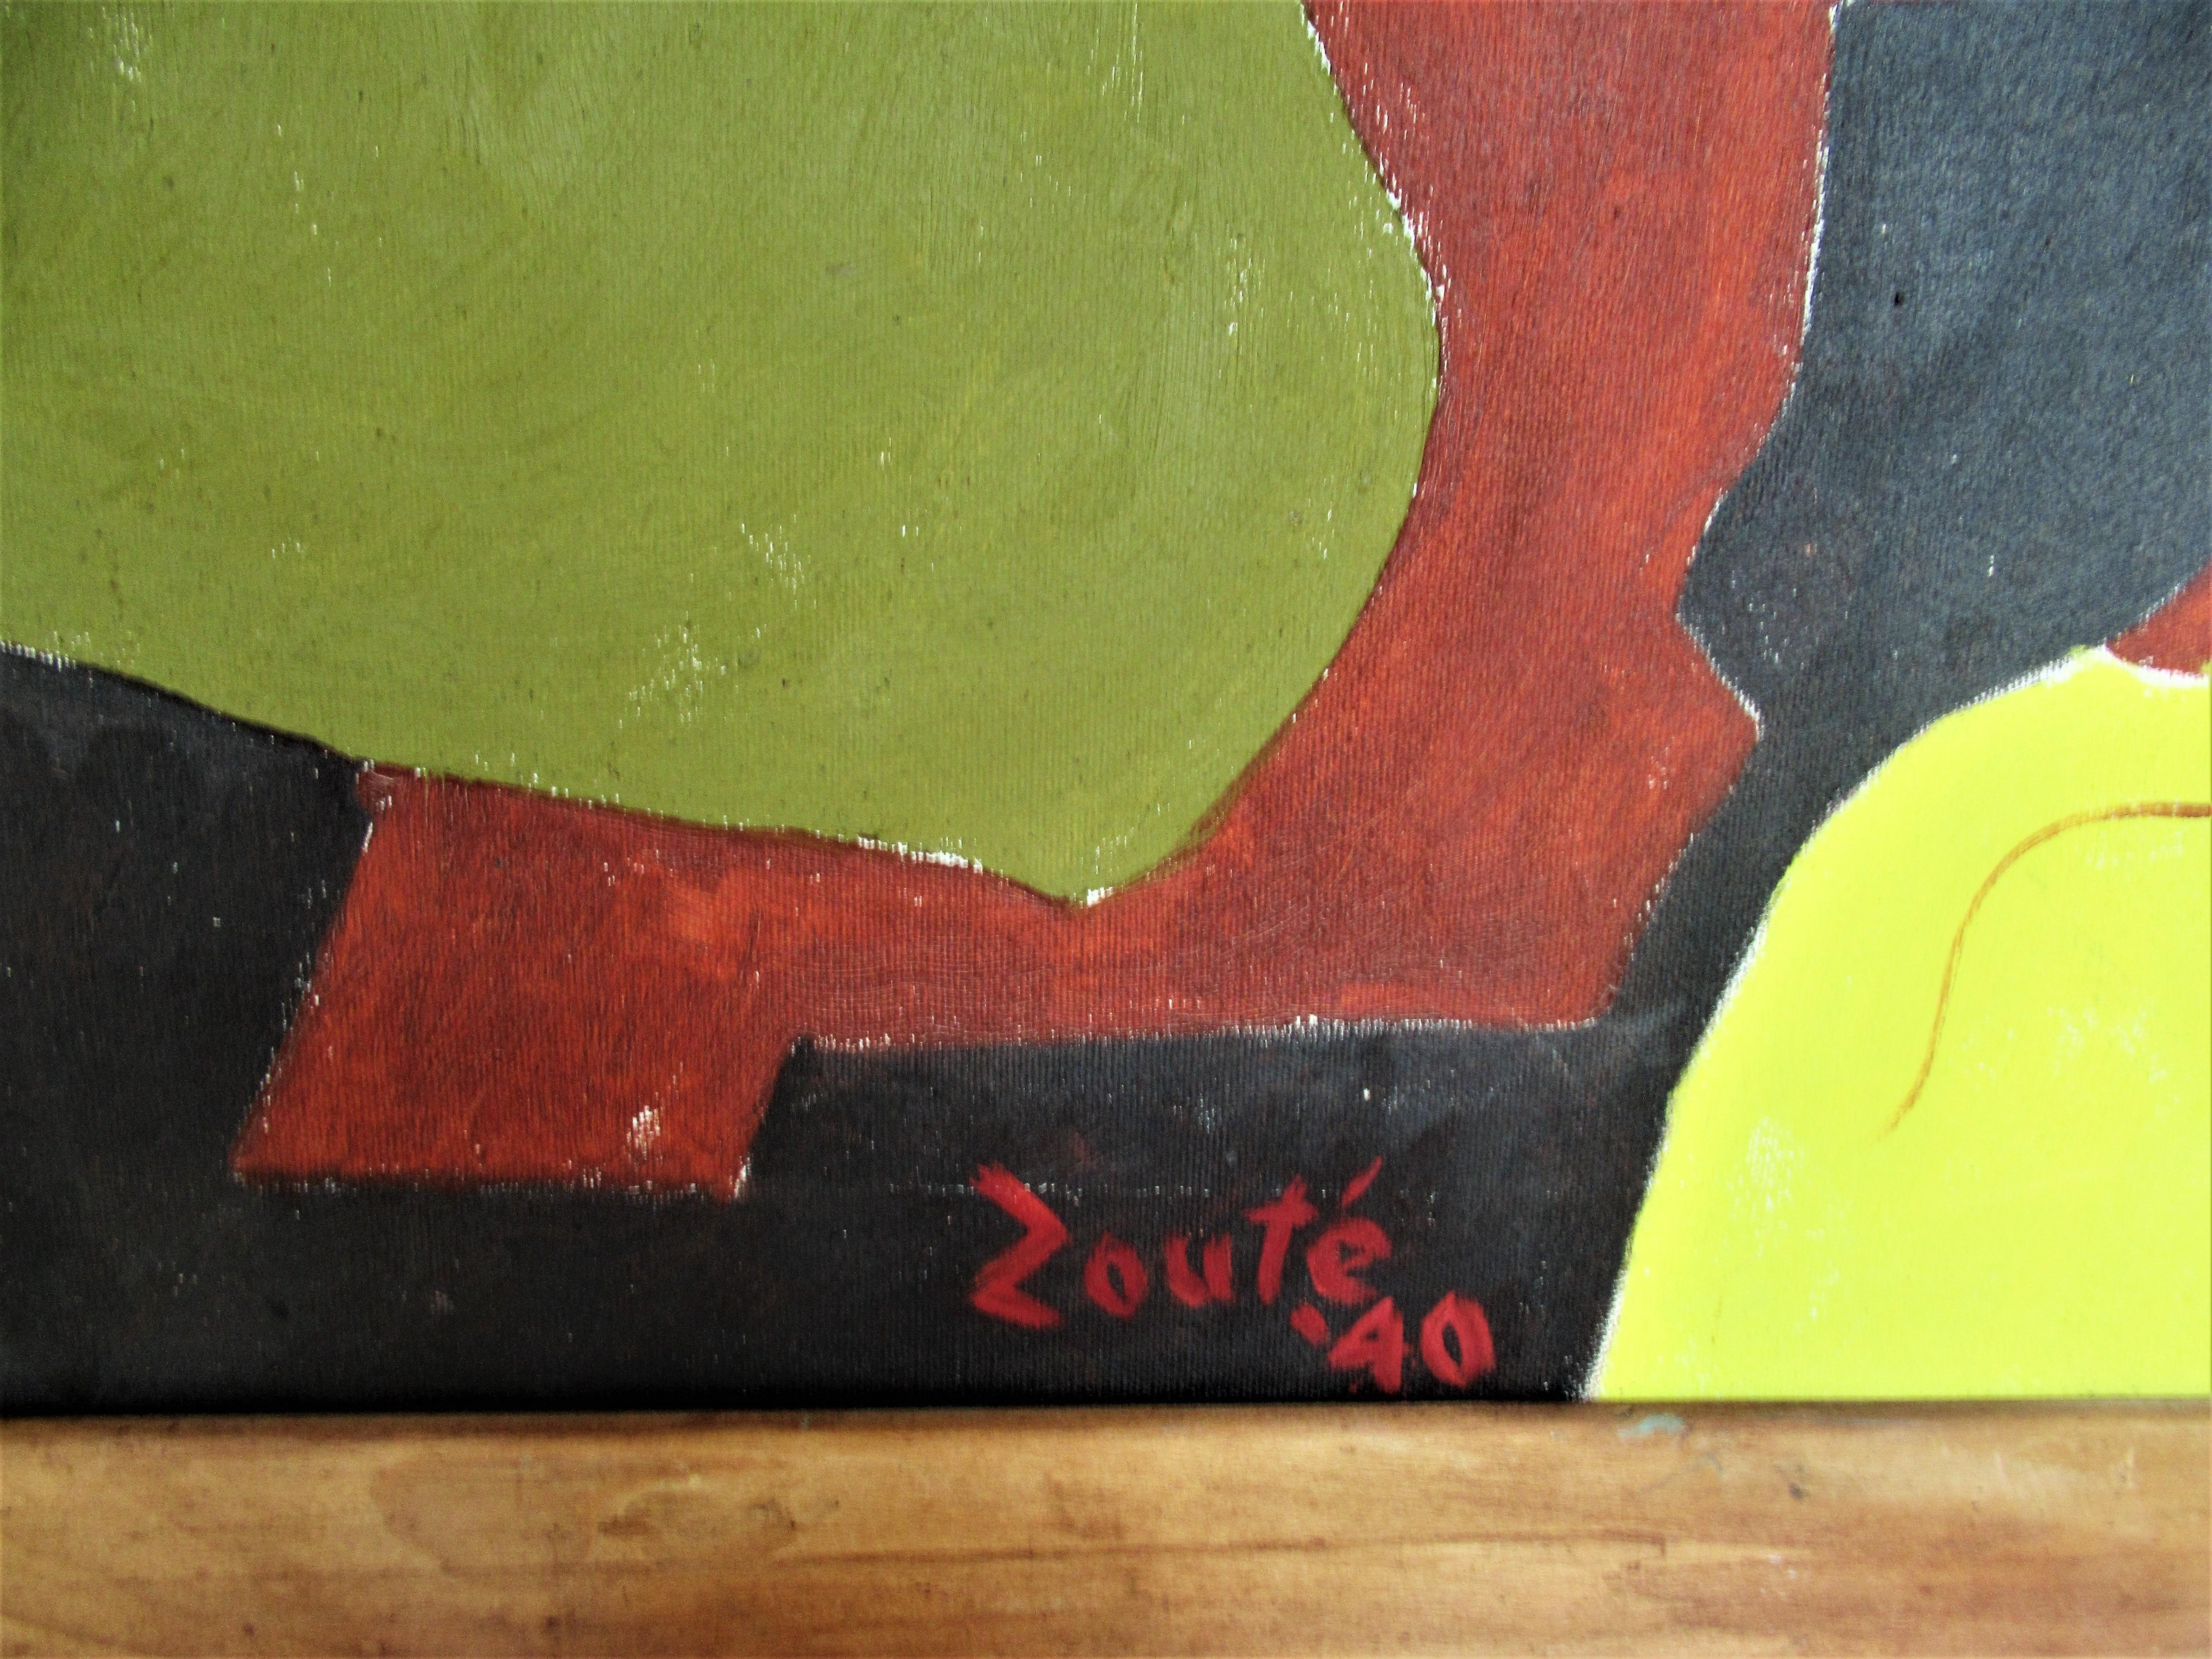  Outsider Art Painting by Zoute, 1940 For Sale 2